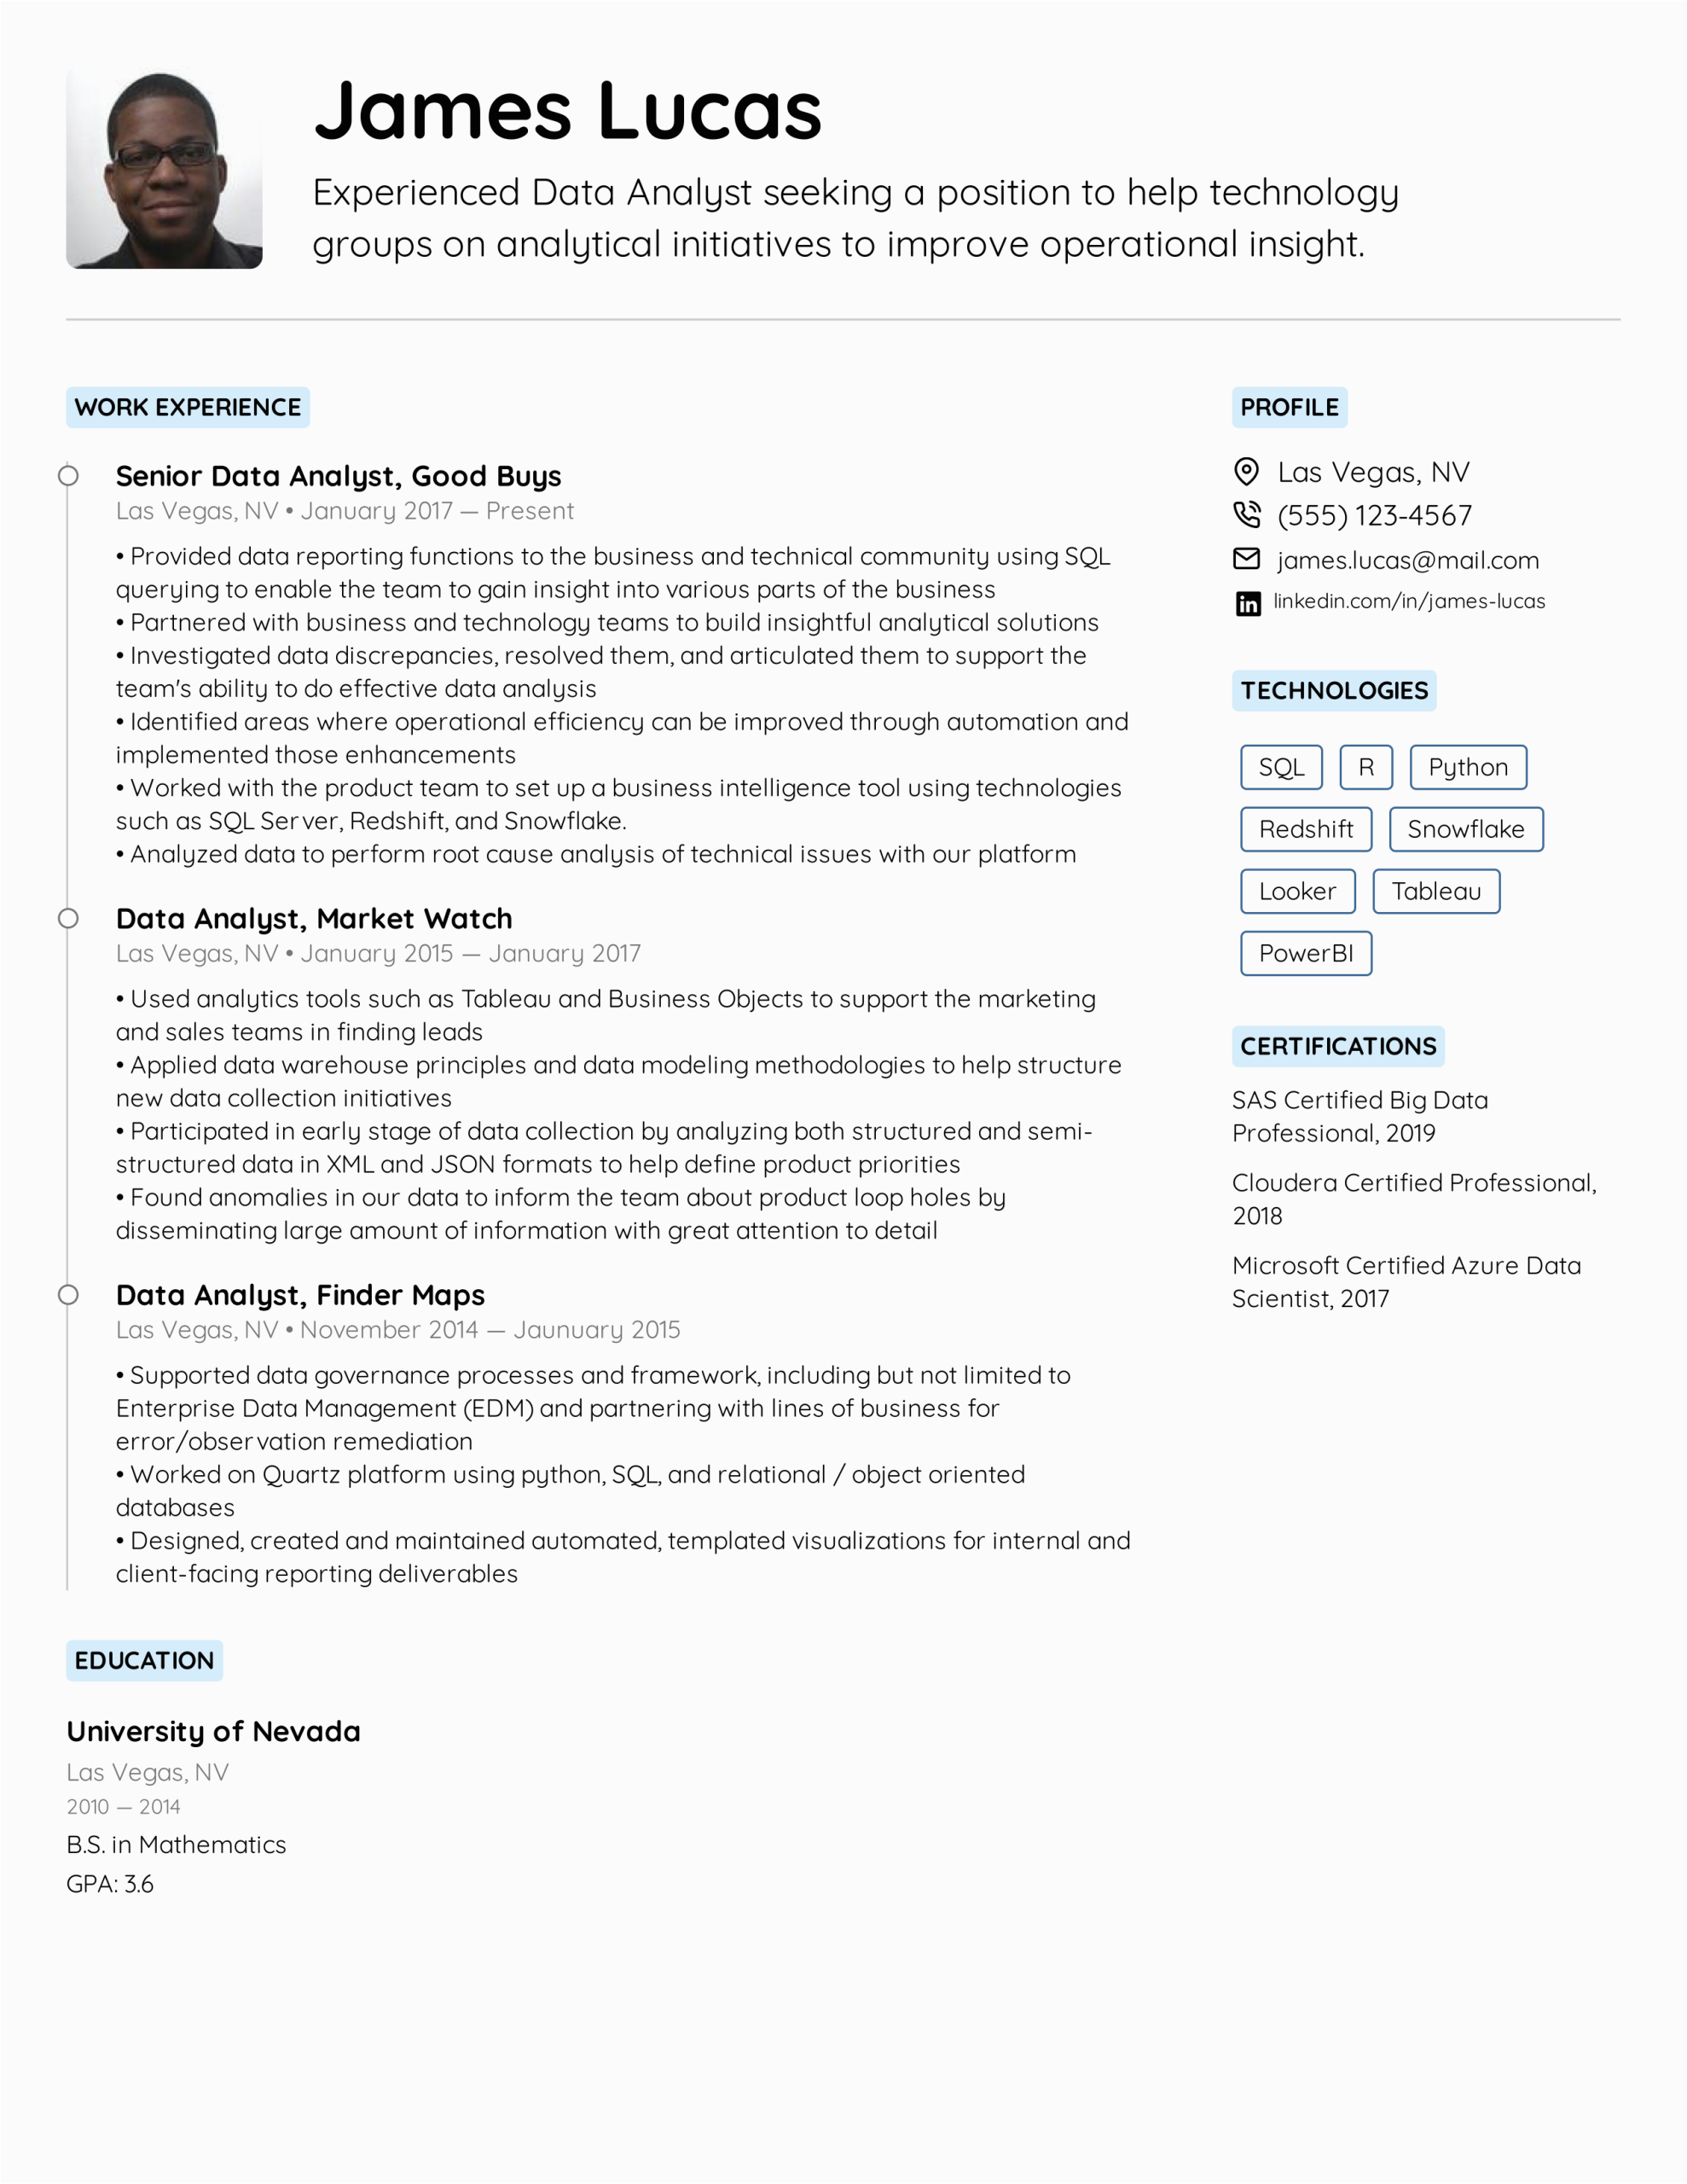 Sample Resume Objective for Data Analyst Free 15 Data Analyst Resumes Free Samples Examples & format Resume